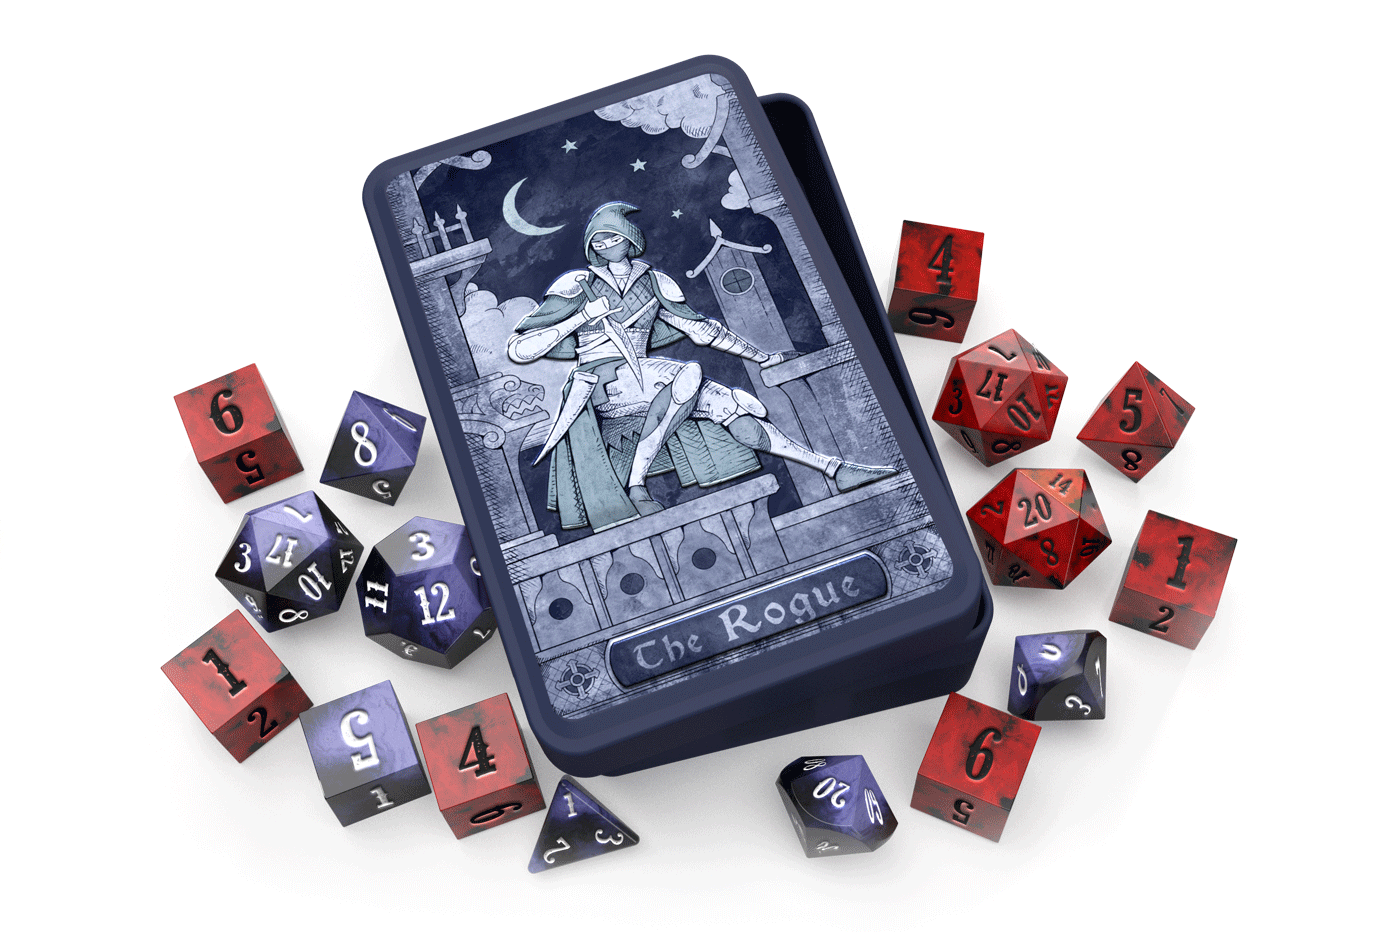 Beadle and Grimm's Rogue Dice Tin. A dice tin inspired by the rogue class with an illustration of a hooded rogue on a rooftop wielding a dagger. The tin is surrounded by red and purple dice.